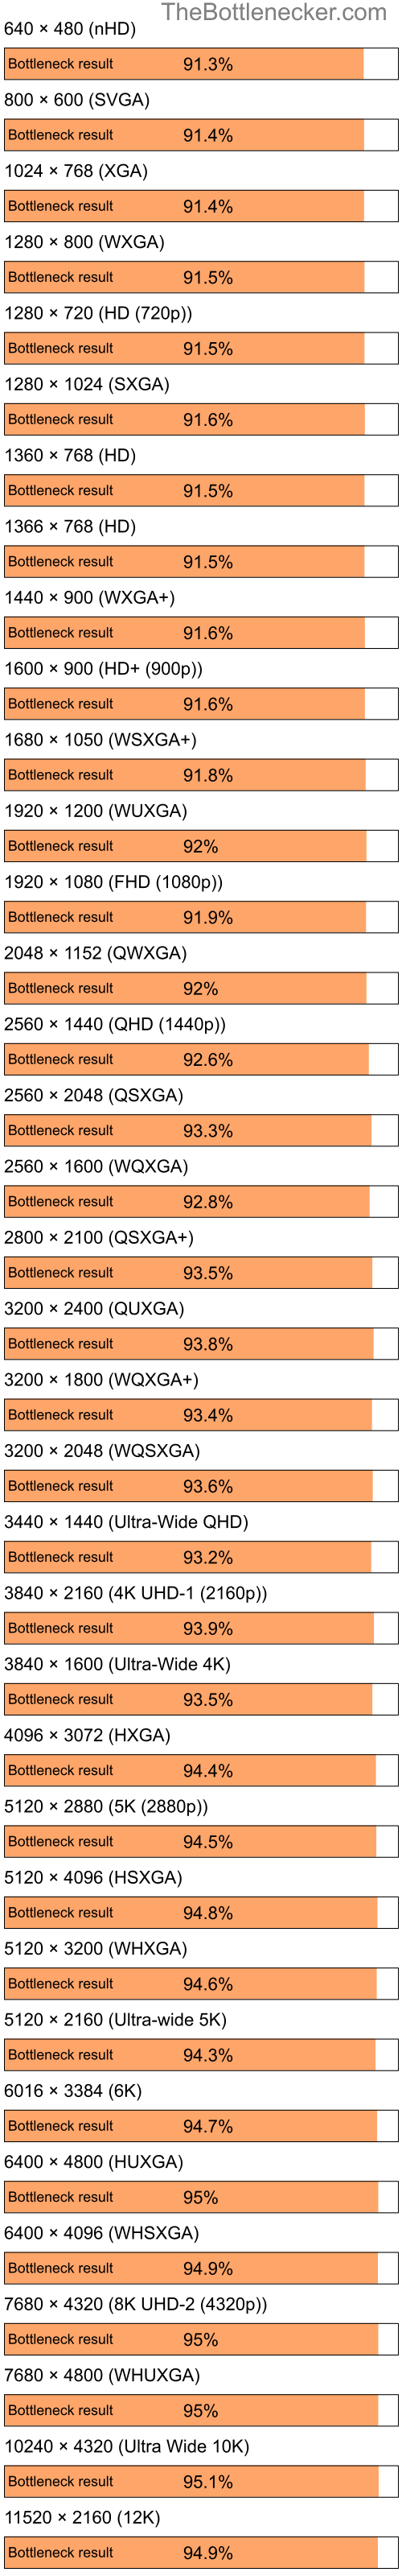 Bottleneck results by resolution for Intel Pentium 4 and NVIDIA GeForce2 MX 200 in General Tasks